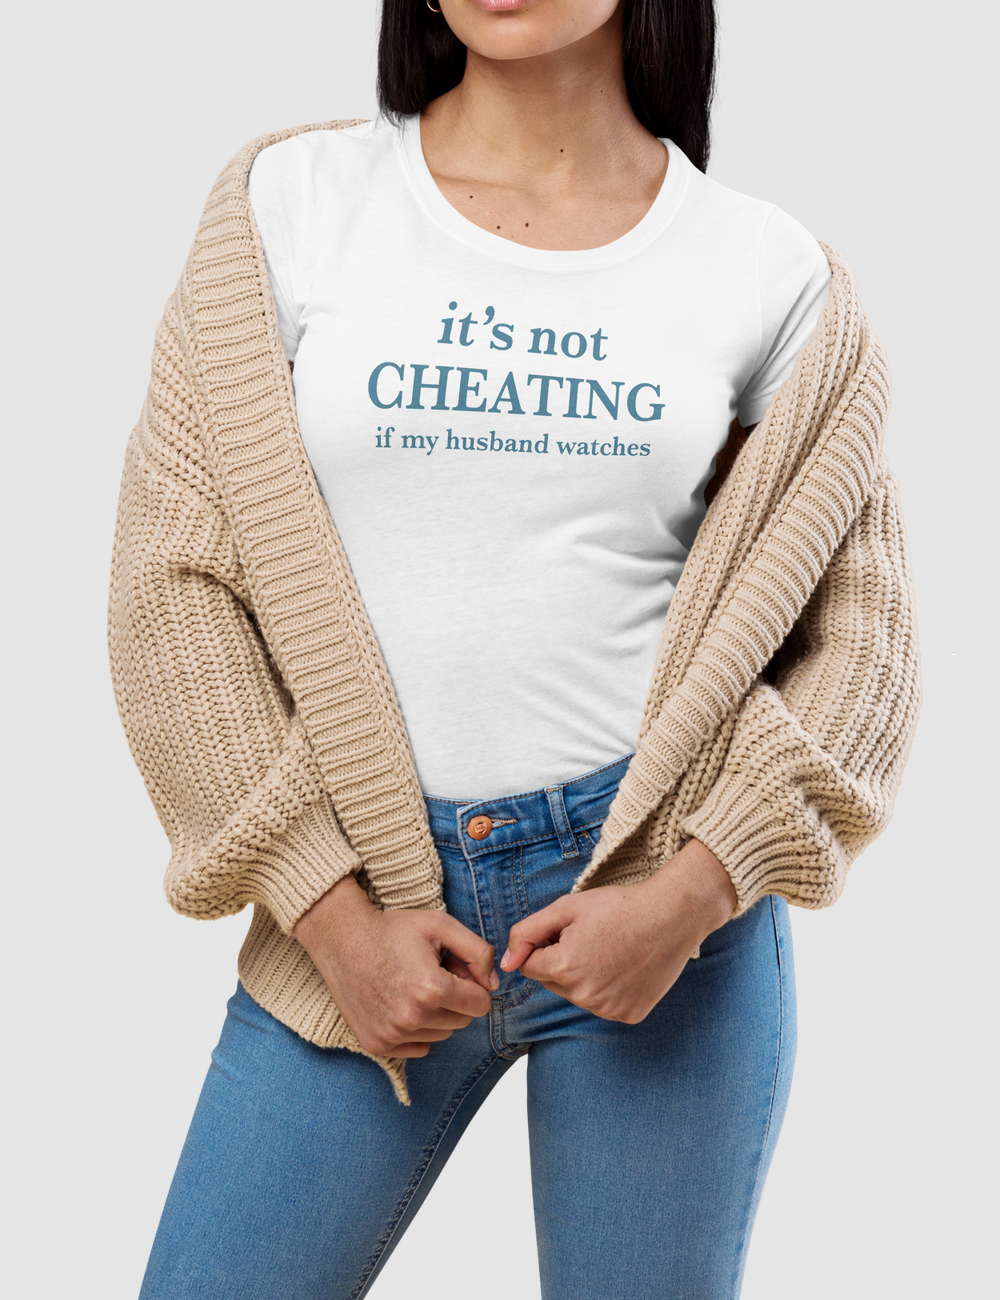 It's Not Cheating If My Husband Watches | Women's Fitted T-Shirt OniTakai